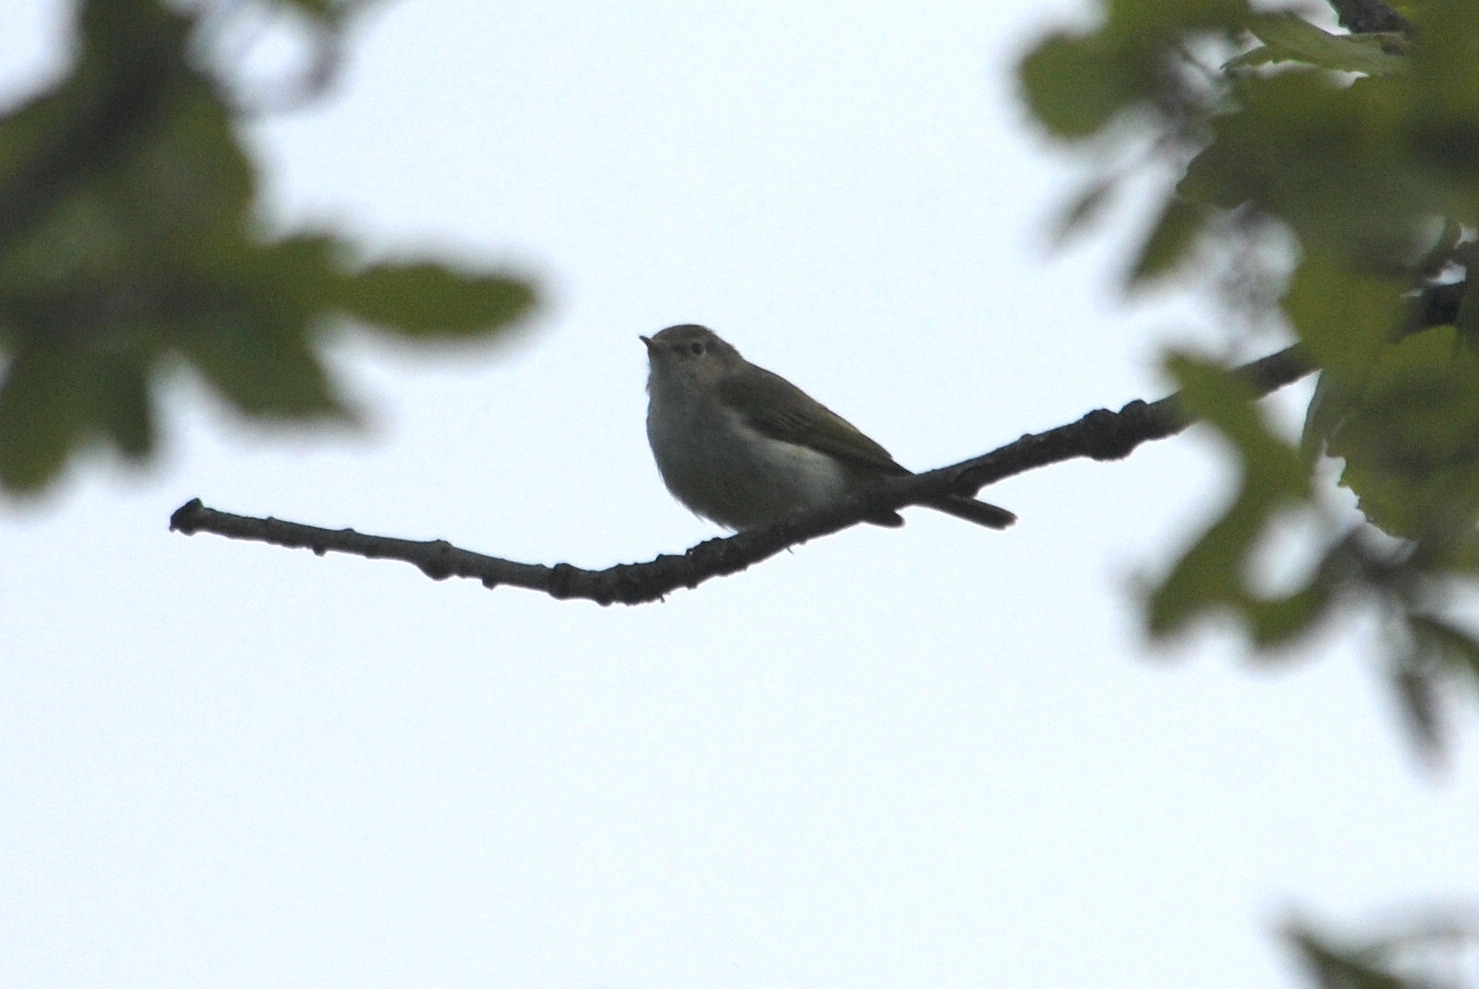 Click picture to see more Bonelli's Warblers.